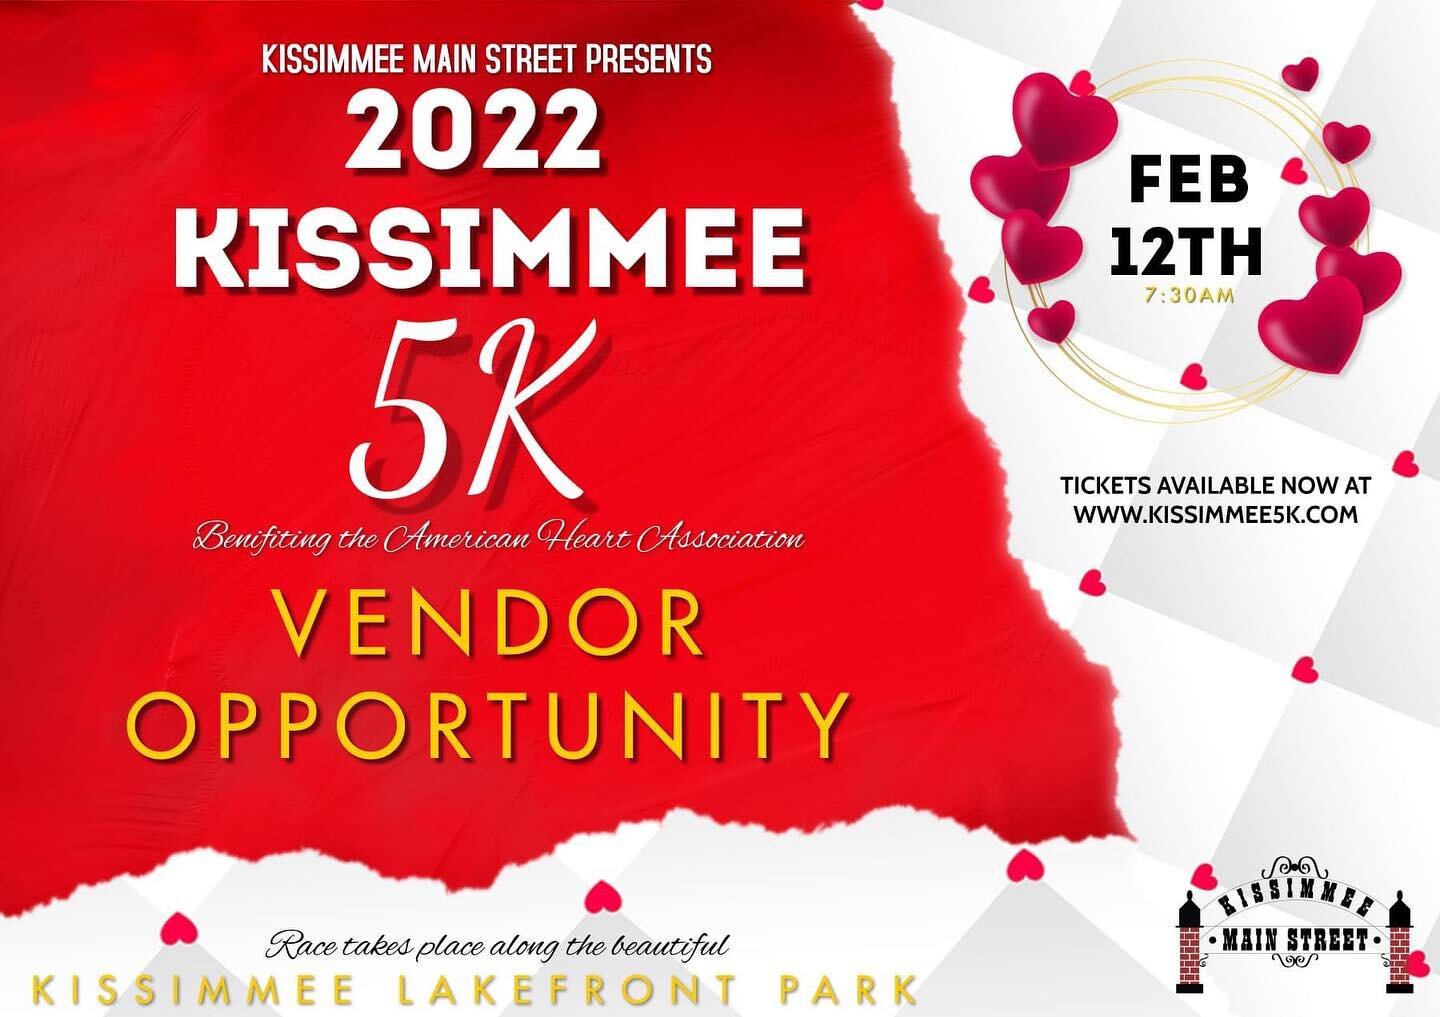 🚨 VENDOR OPPORTUNITY 🚨
Do you run a gym, sports organization, martial arts school, or  local non profit looking for an opportunity to connect with the community?
 Kissimmee Main Street is currently seeking vendors for our 2022 Kissimmee 5K. 🏃🏃&zw